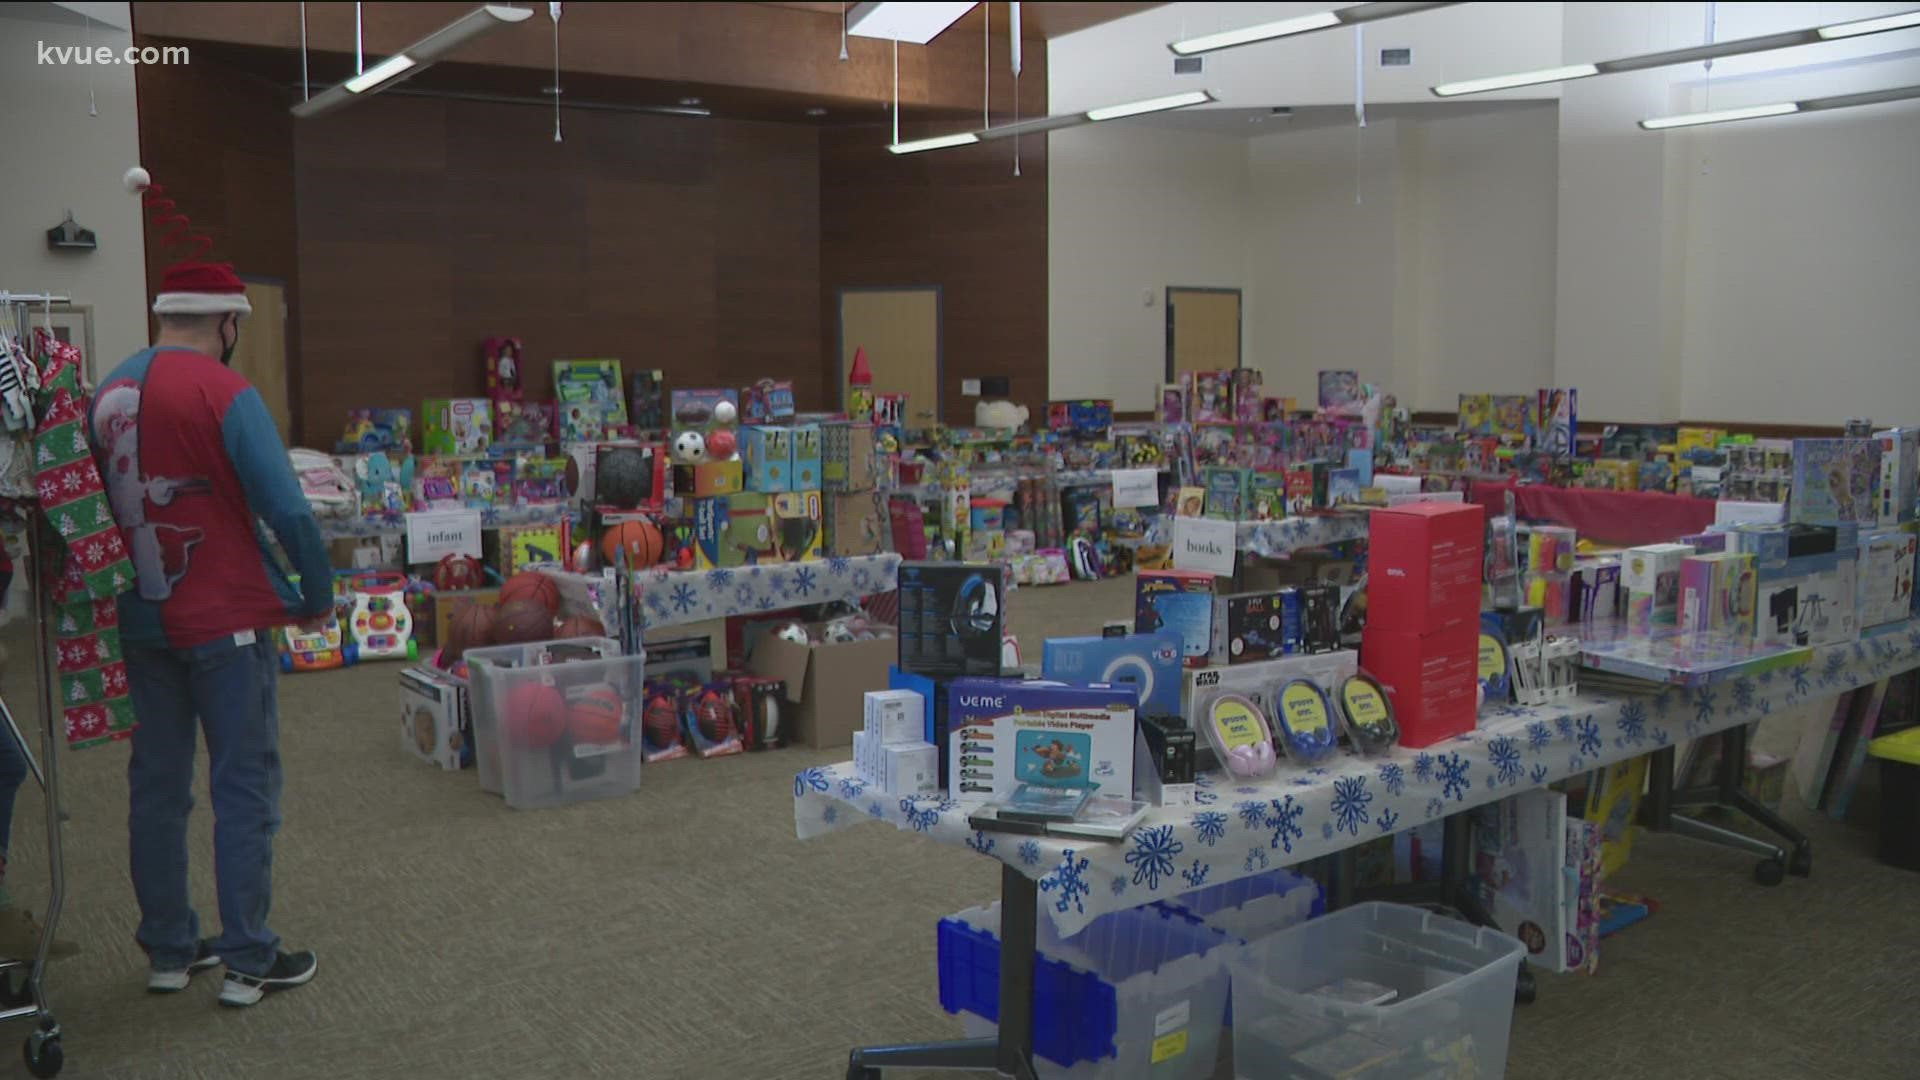 More than 1,500 gifts were donated for pediatric patients and their siblings.